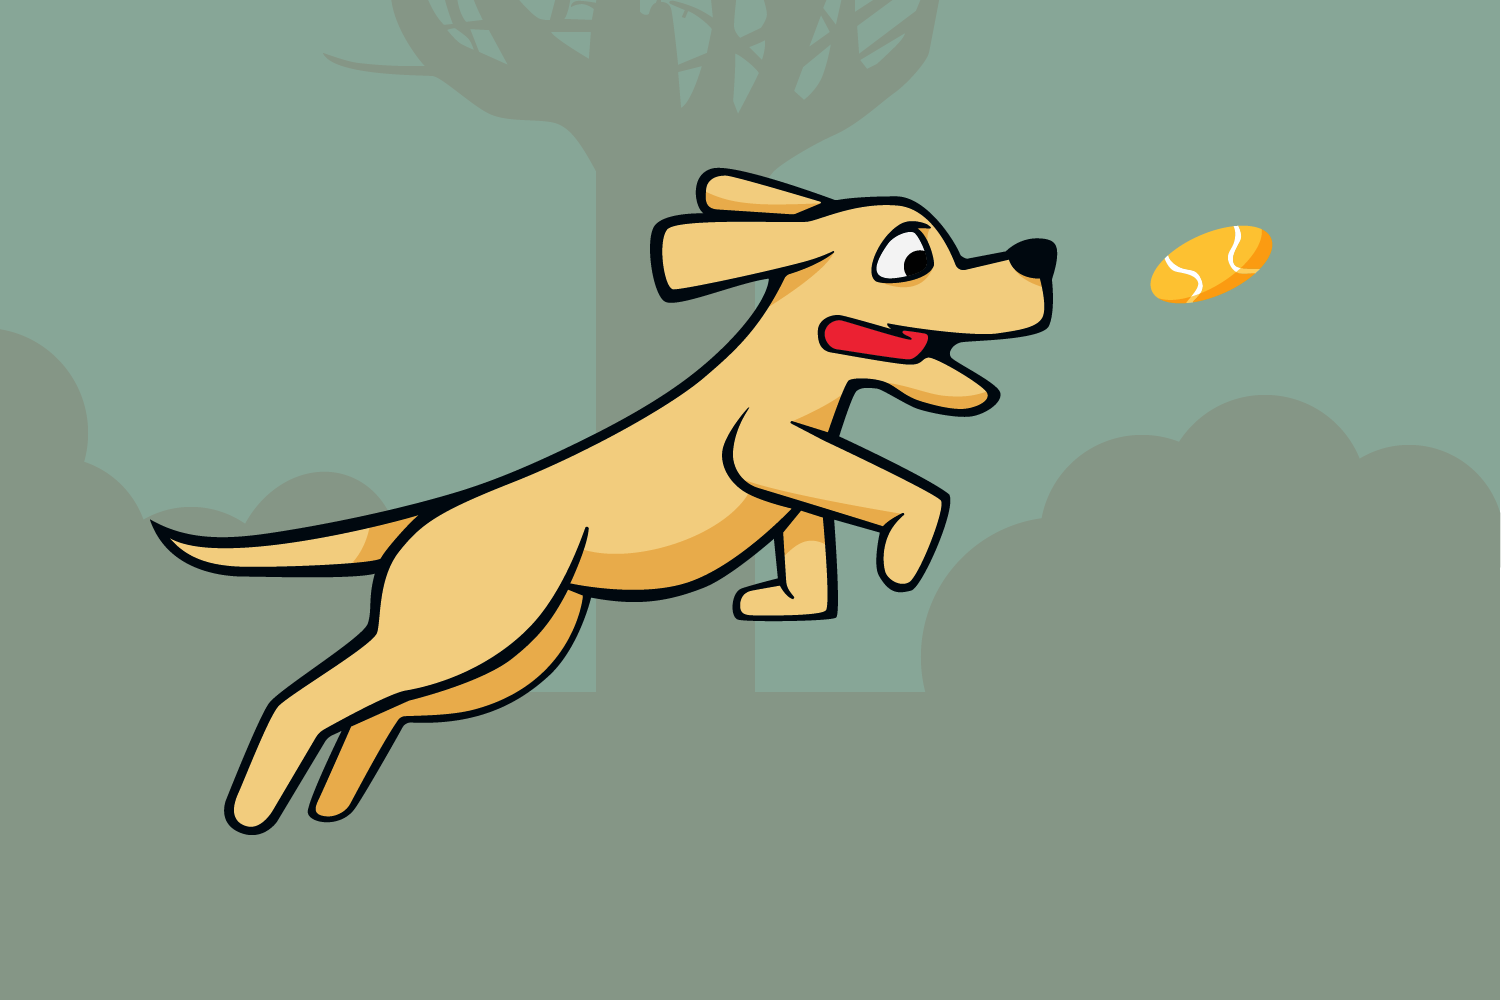 Illustration of a dog in a park jumping to catch a ball